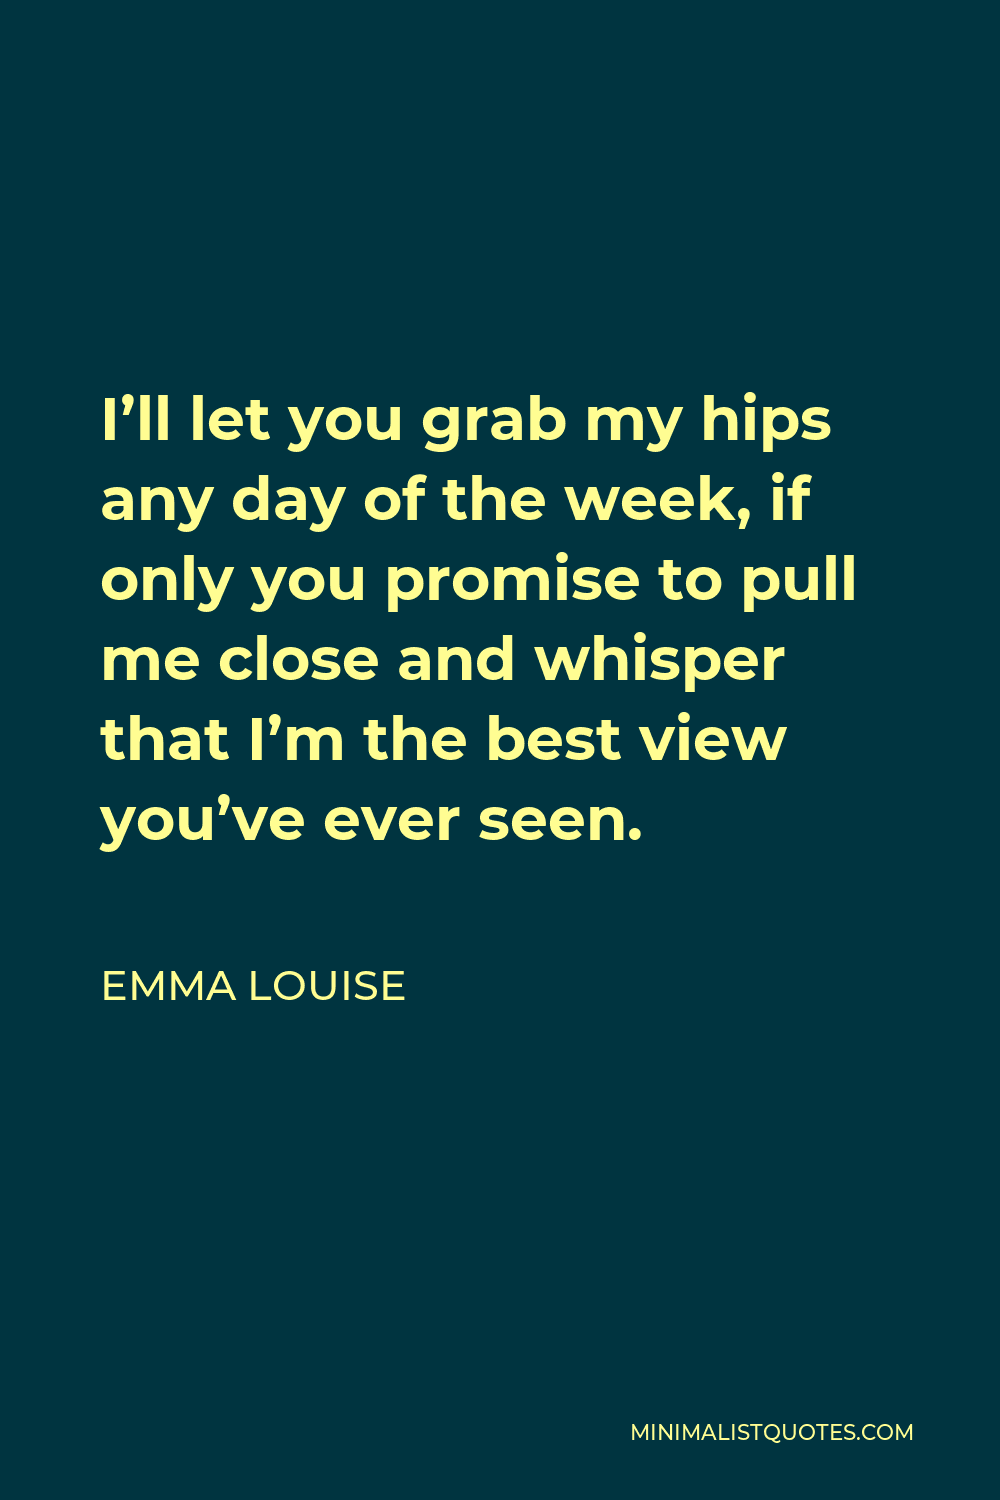 Emma Louise Quote Ill Let You Grab My Hips Any Day Of The Week If Only You Promise To Pull Me 2941